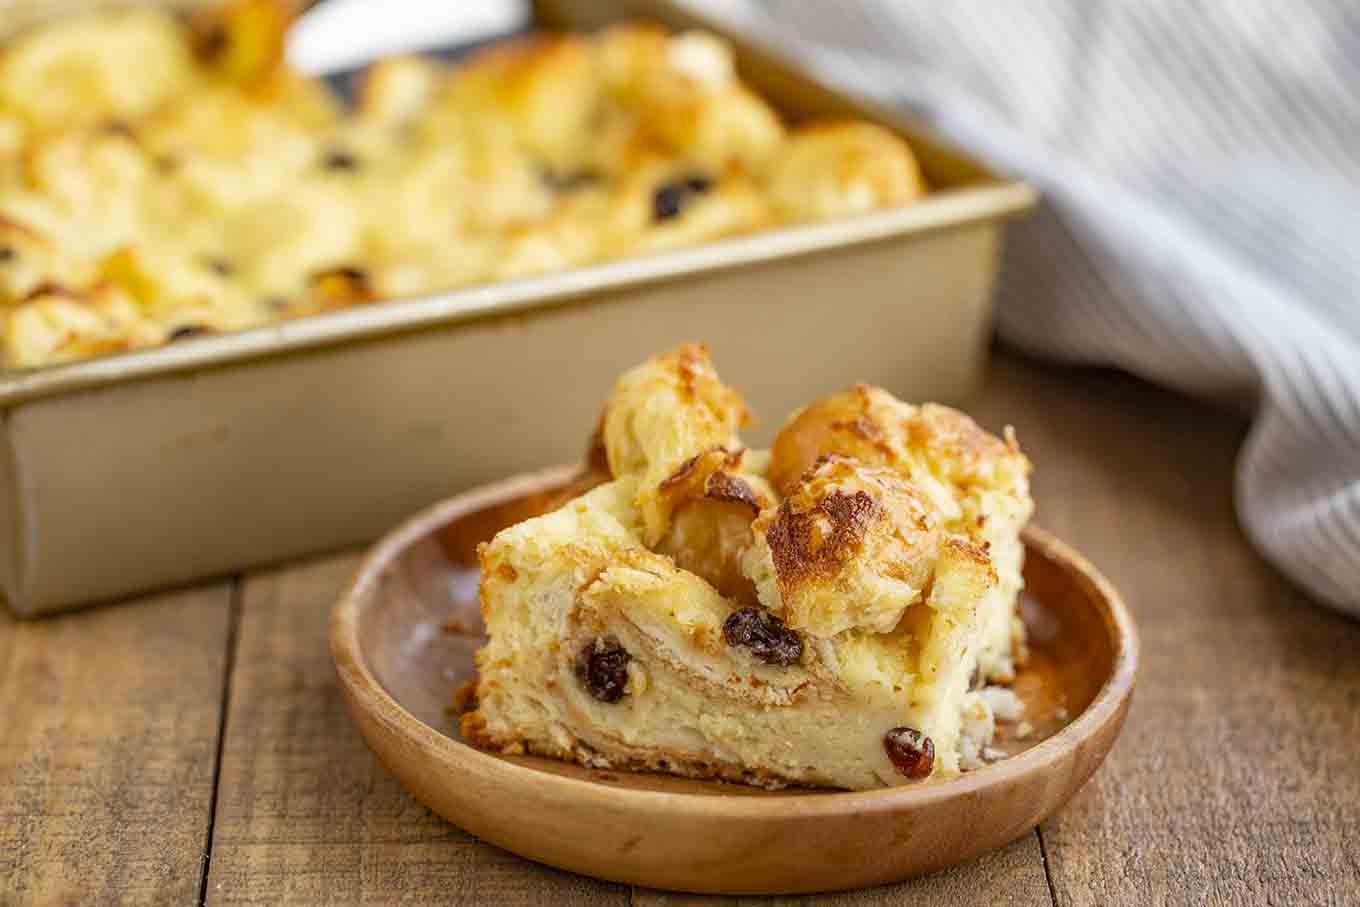 🍰 This Overrated/Underrated Dessert Quiz Will Reveal Your Best Personality Trait Bread pudding